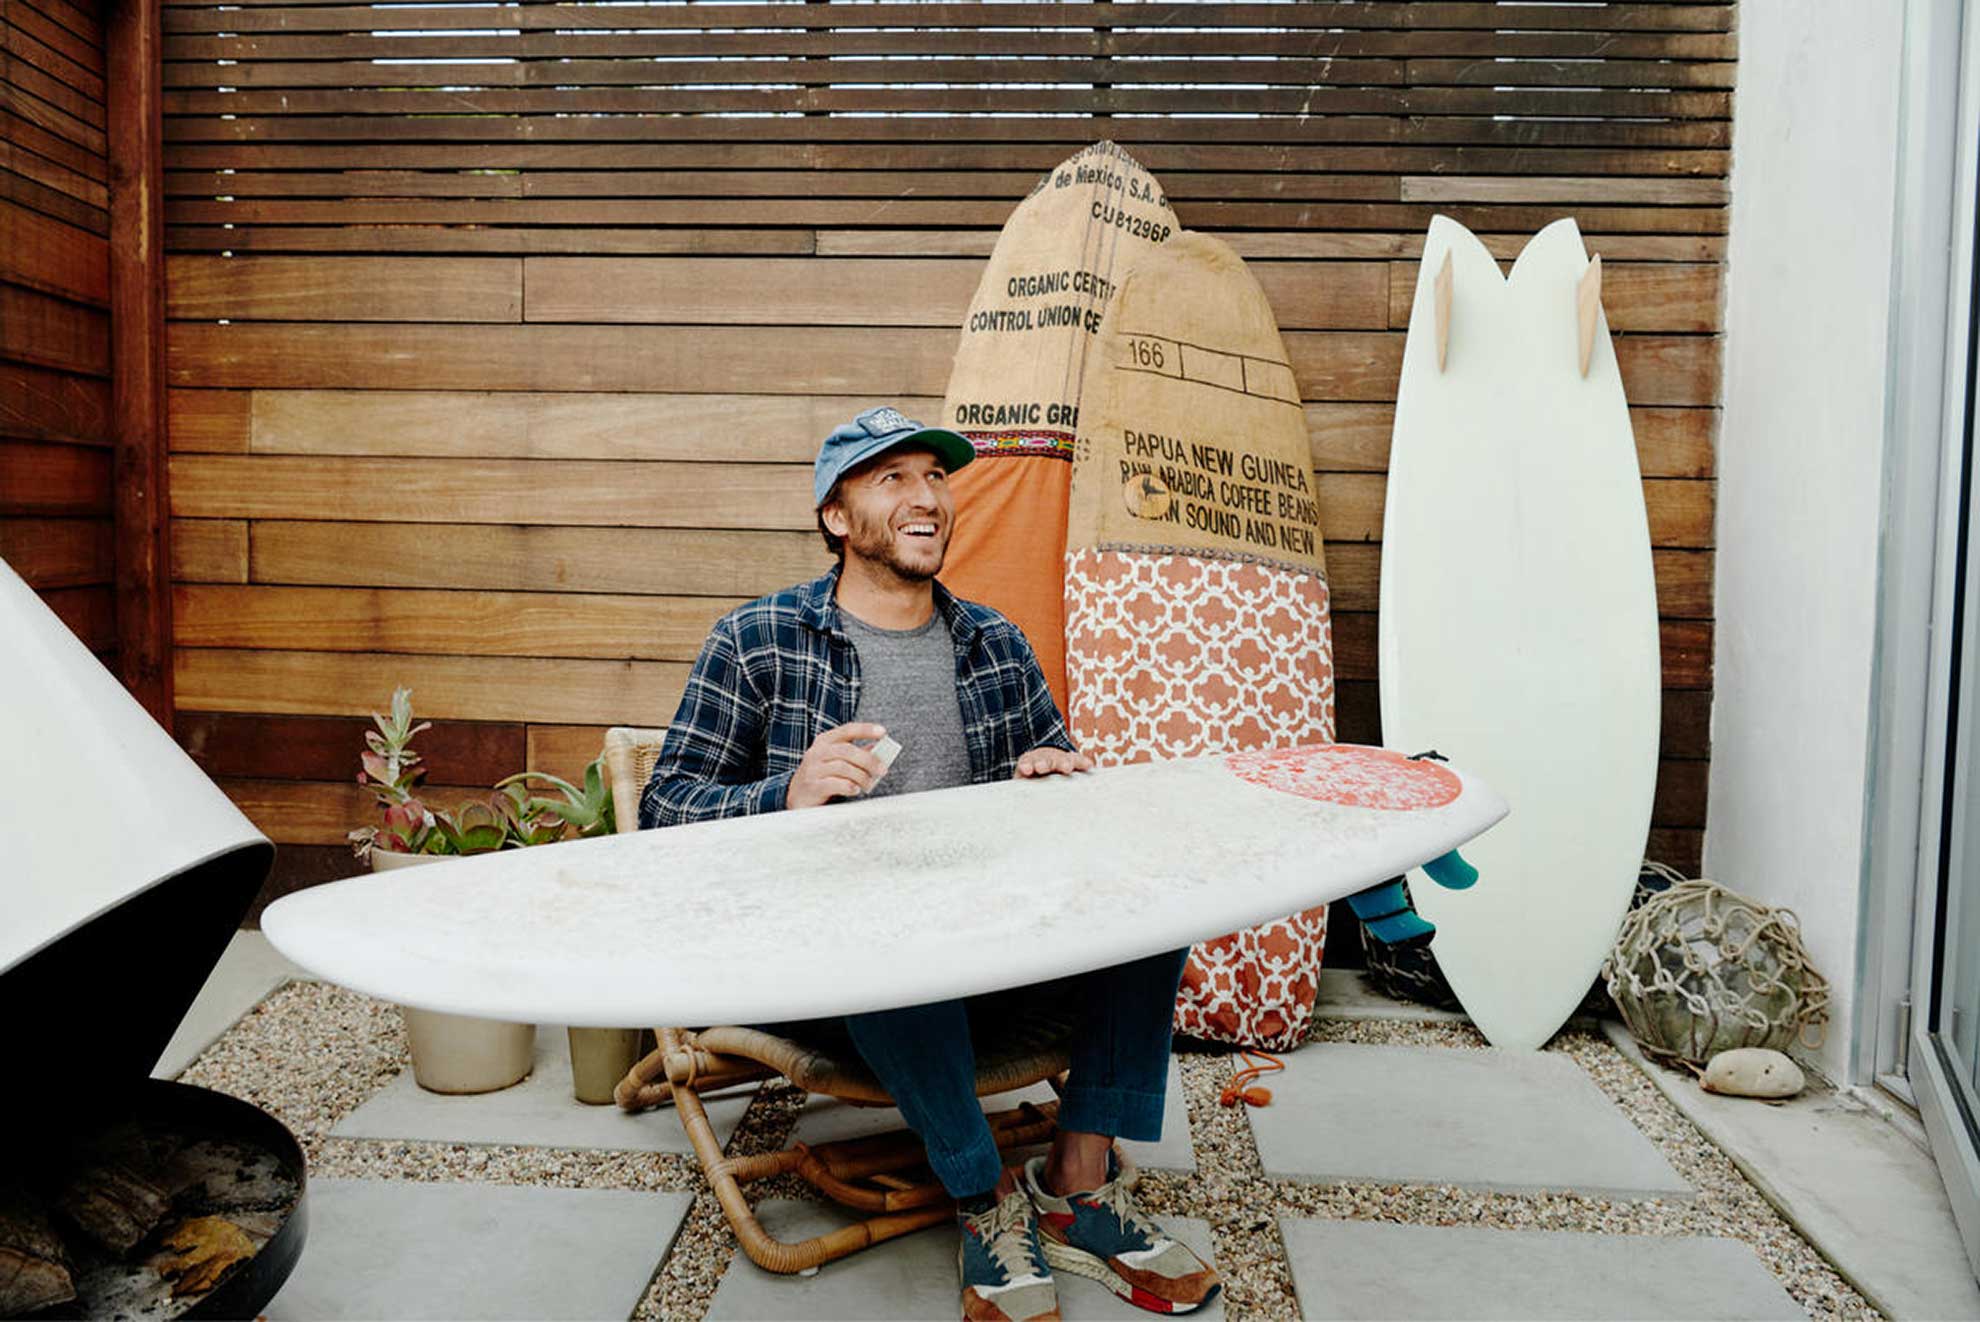 Airbnb host pictured with surf boards